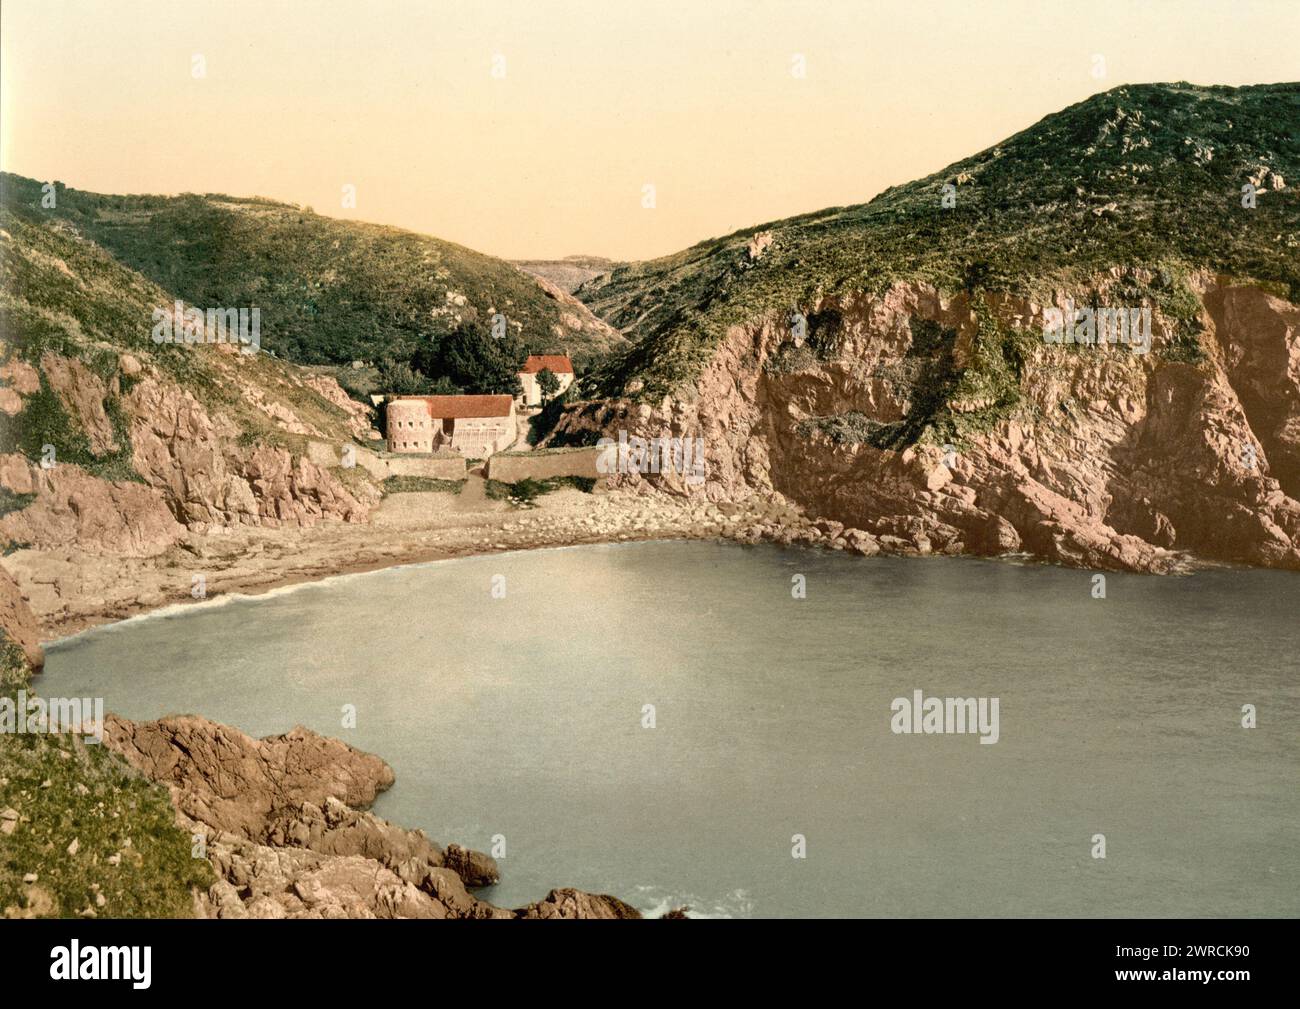 Guernsey, Petit Bot Bay, Isole del Canale, tra ca. 1890 e ca. 1900., Channel Islands, Guernsey, Color, 1890-1900 Foto Stock